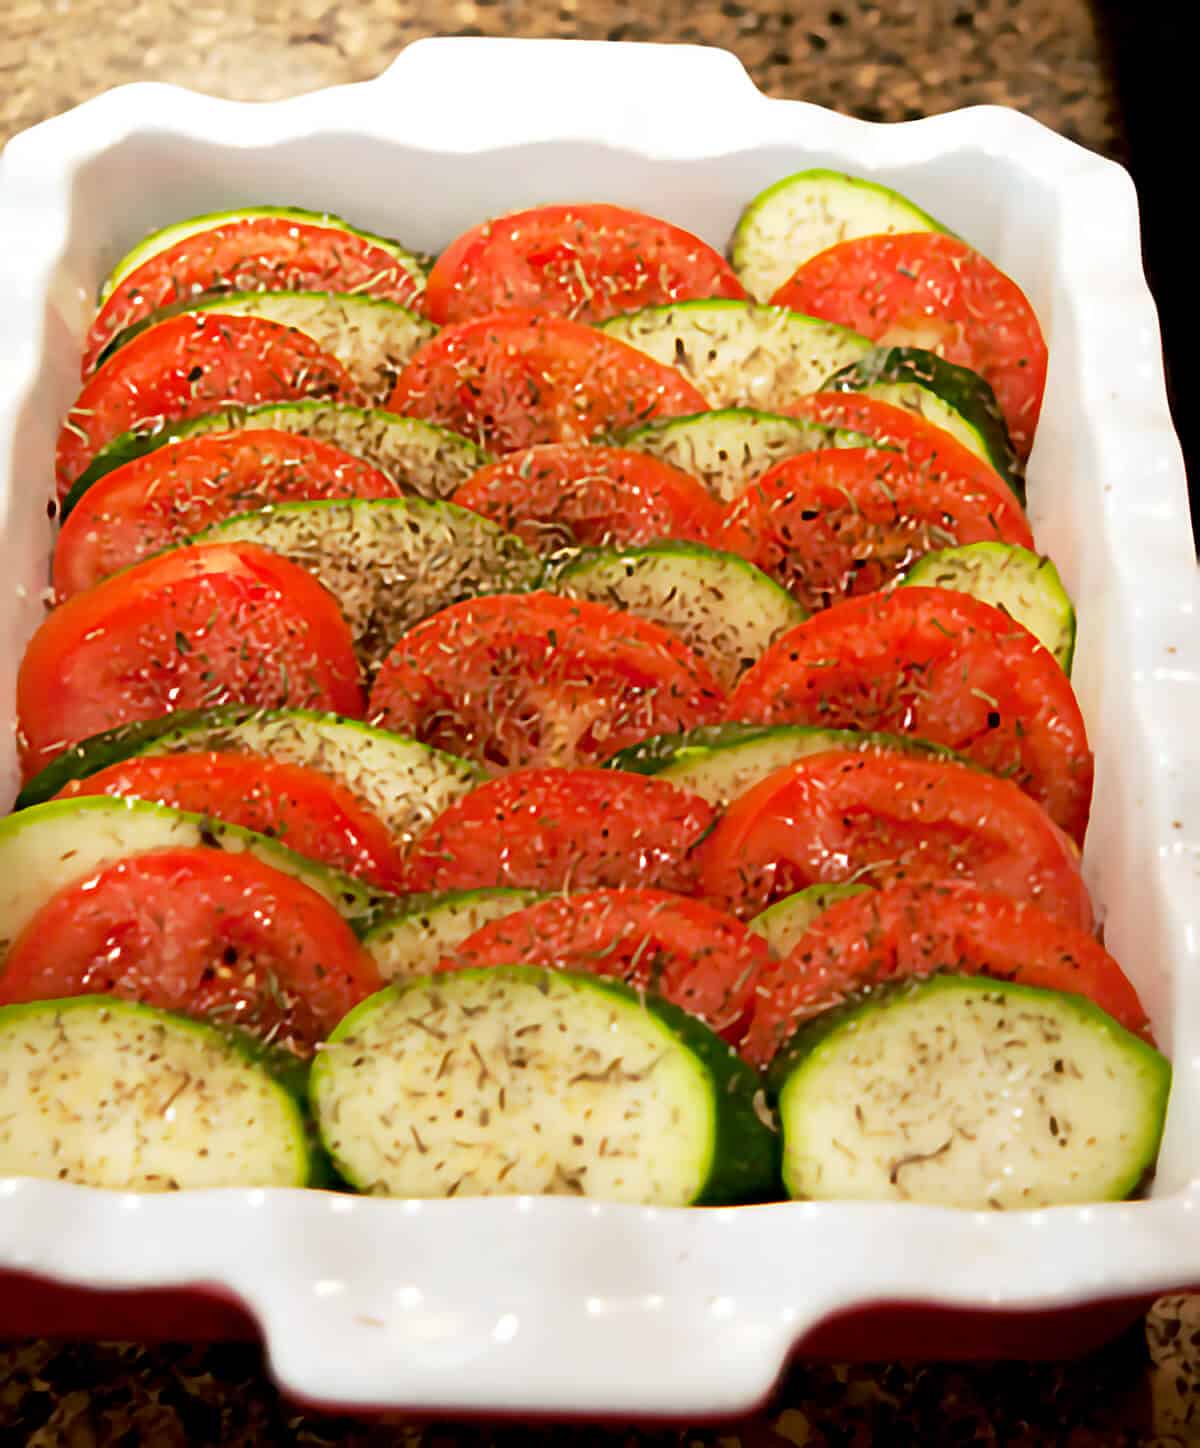 Zucchini and tomato slices layered in a baking dish.